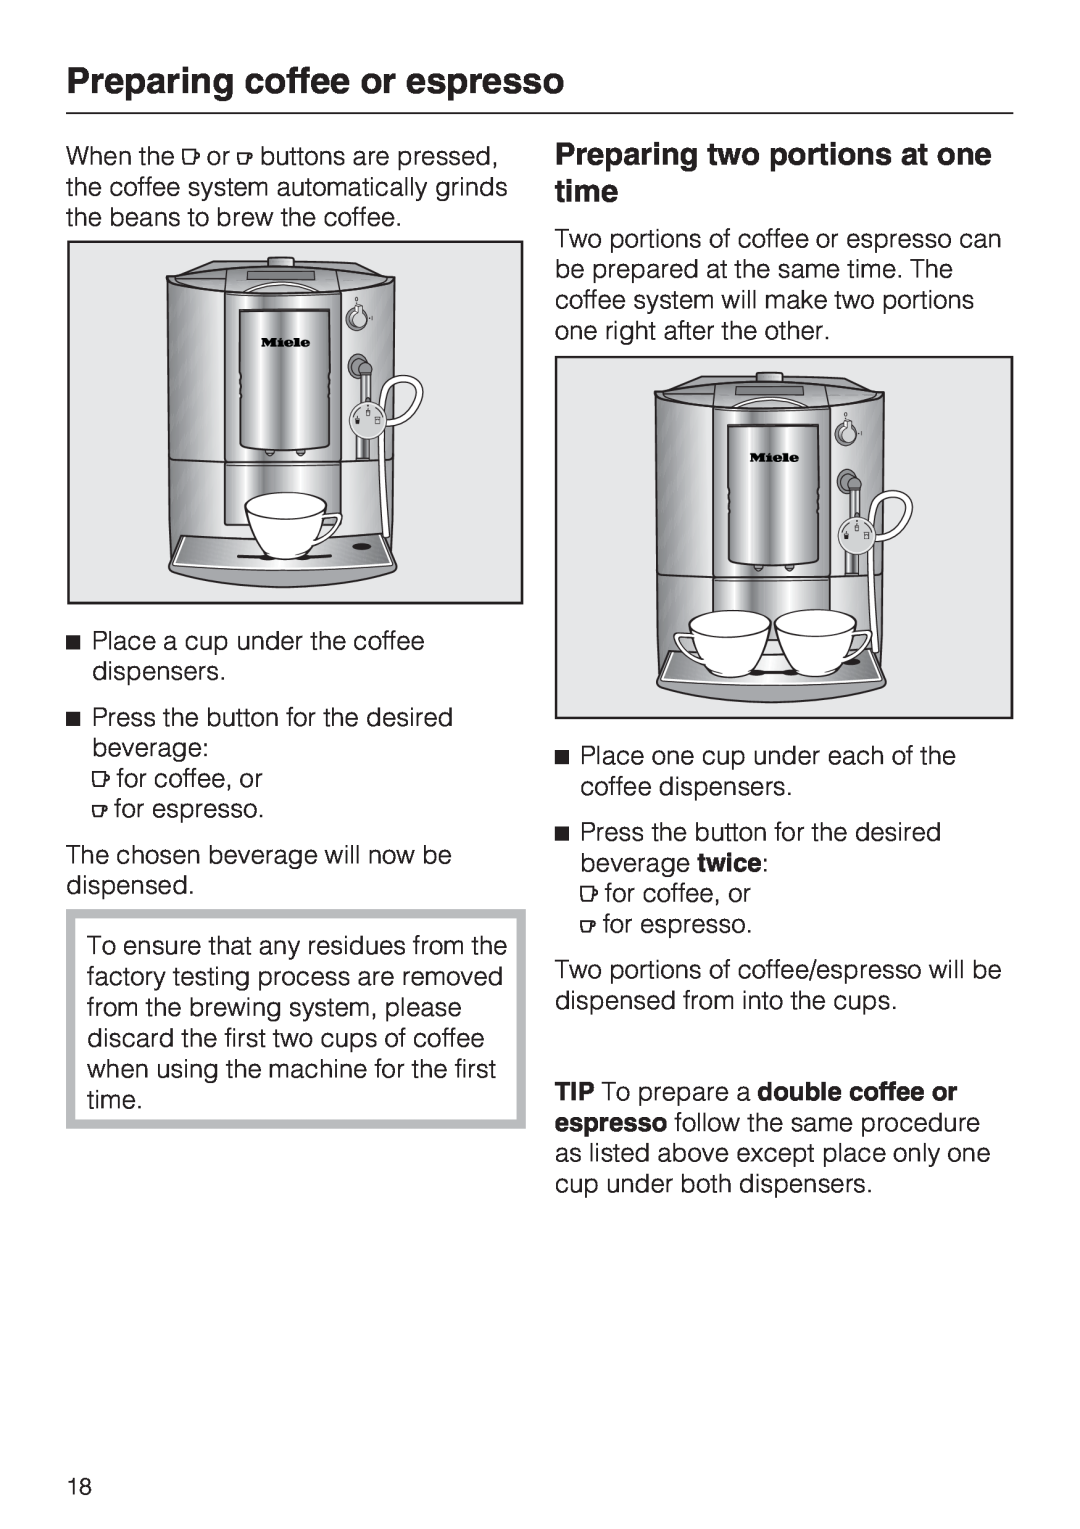 Miele CM 5000 operating instructions Preparing coffee or espresso, Preparing two portions at one time 